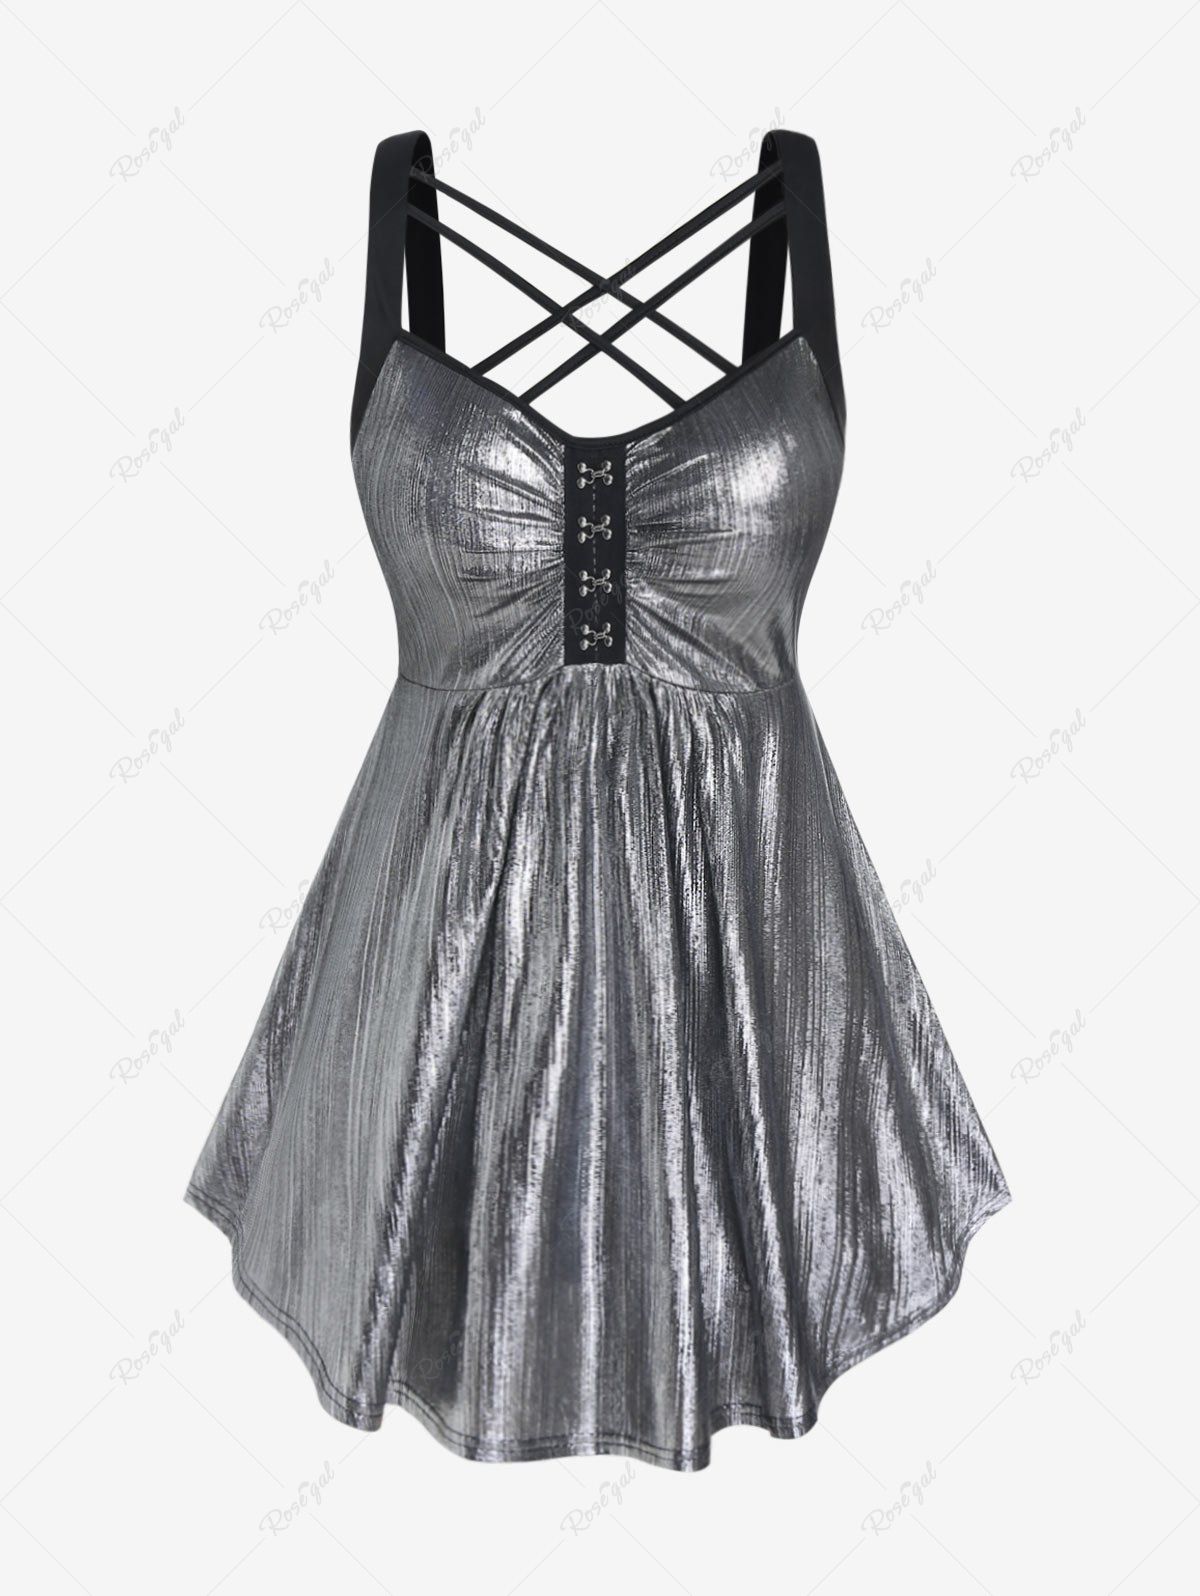 Latest Plus Size Crisscross Strappy Backless Metal Tunic Top  